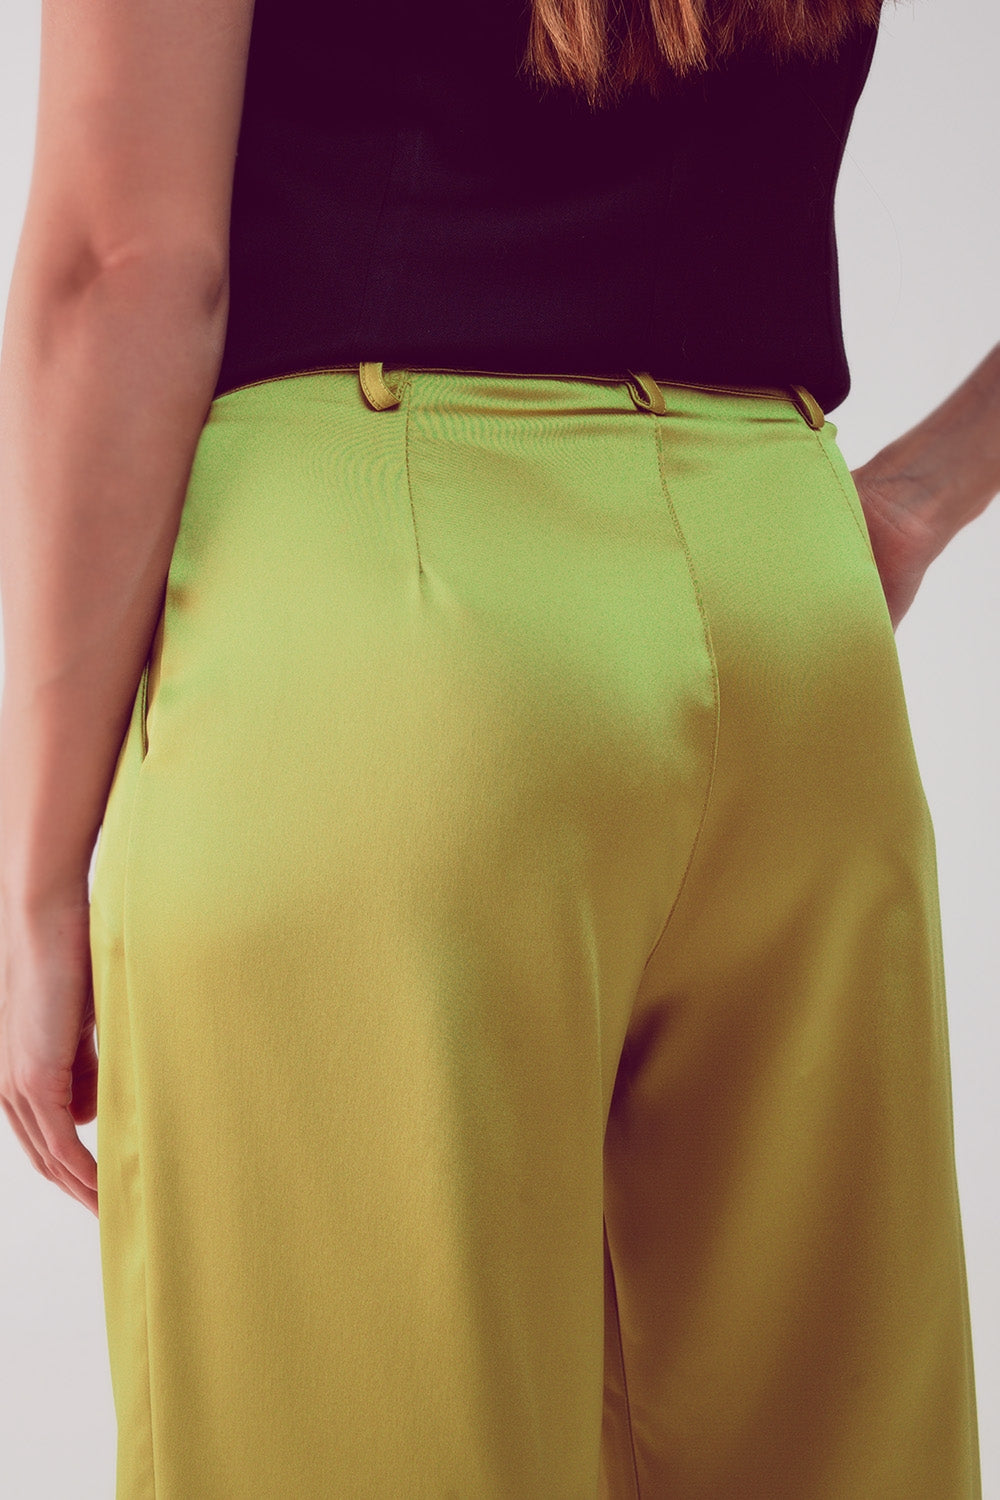 RM - Palazzo Pleated Pants in Acid Lime